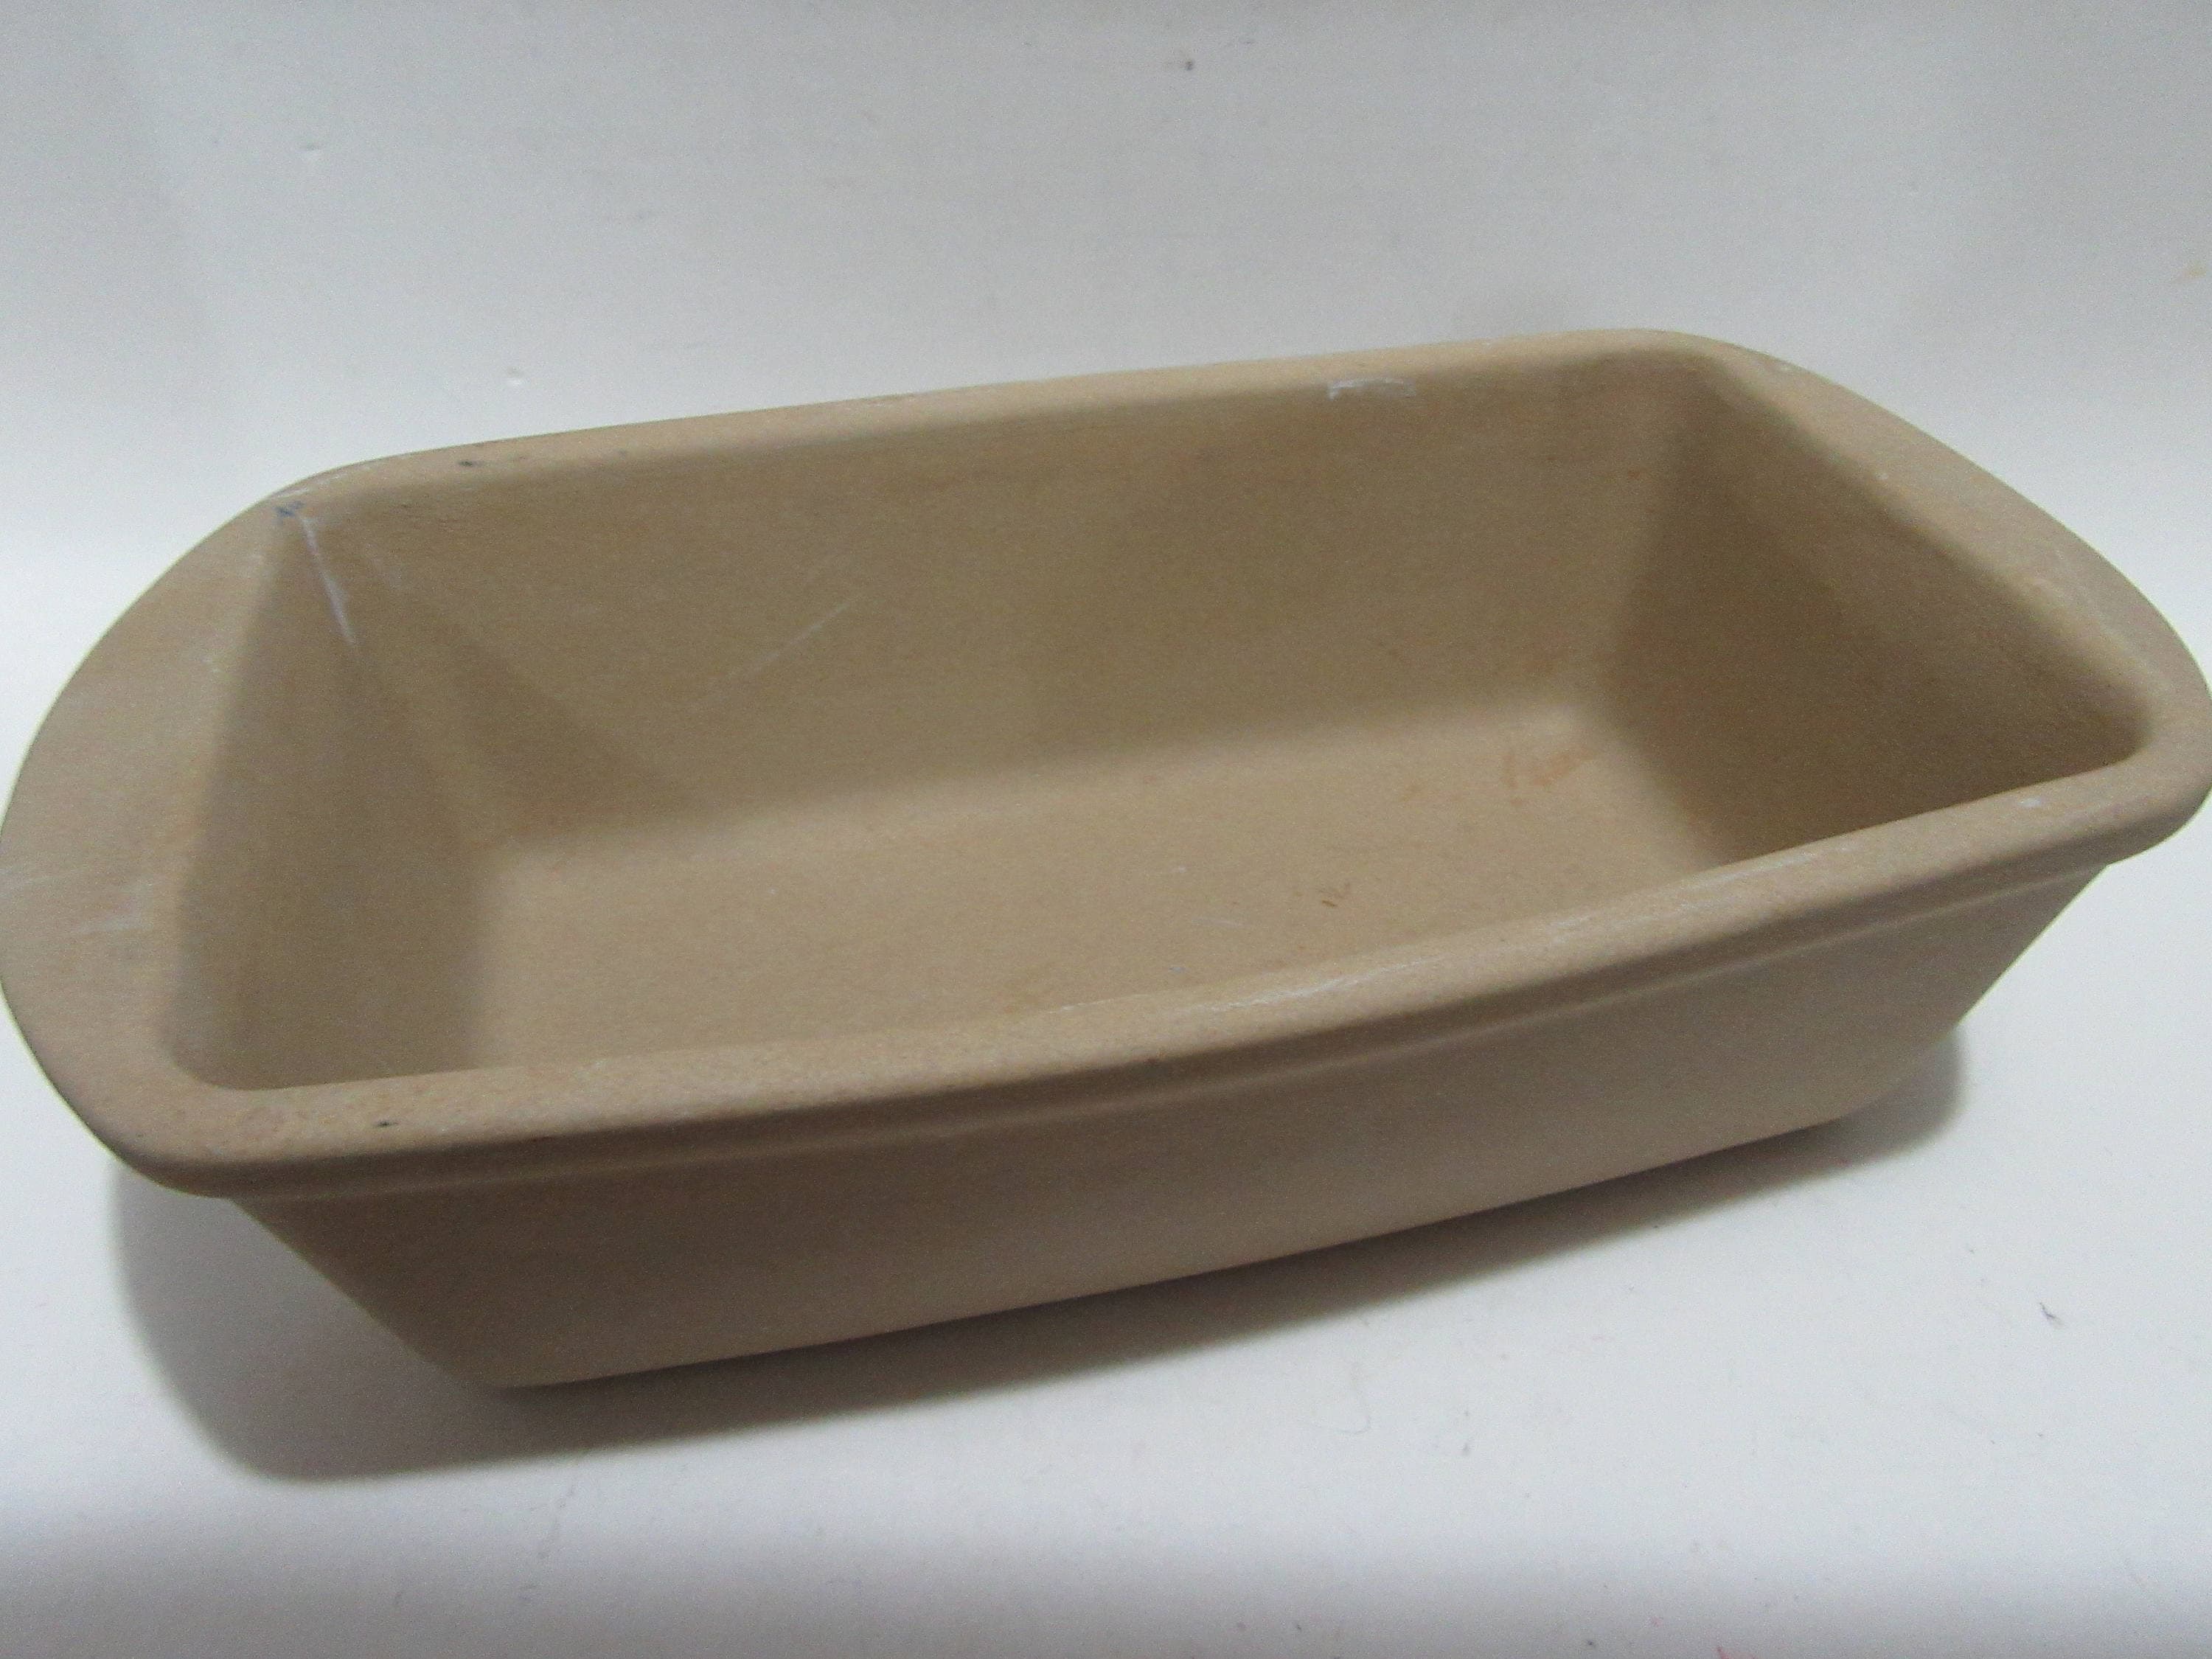 THE PAMPERED CHEF FAMILY HERITAGE COLLECTION STONEWARE LOAF PAN #1417